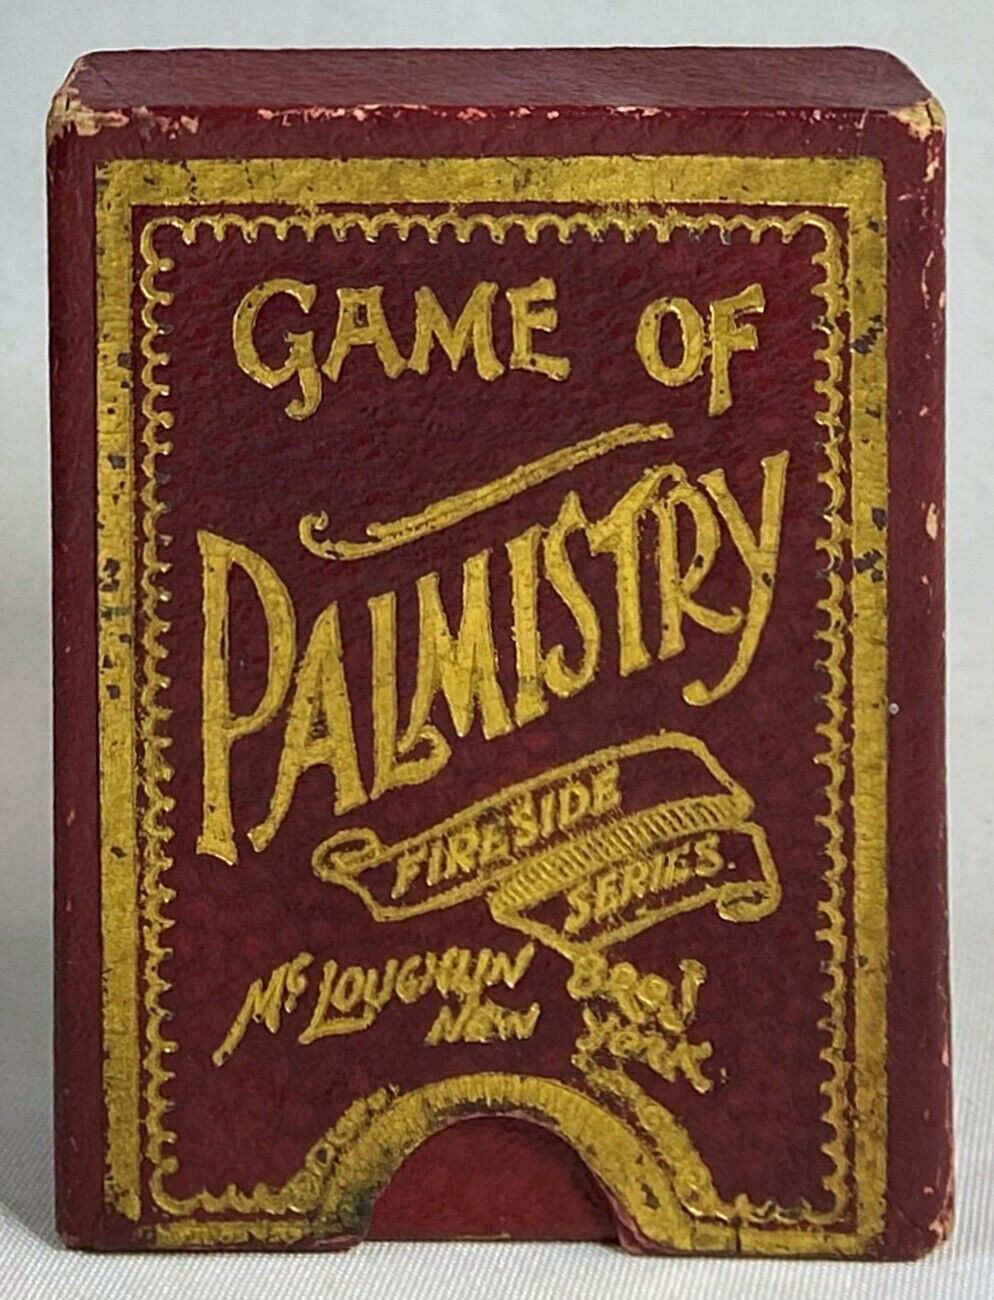 Antique 1900 GAME OF PALMISTRY Victorian Fortune Telling Cards MCLOUGHLIN BROS